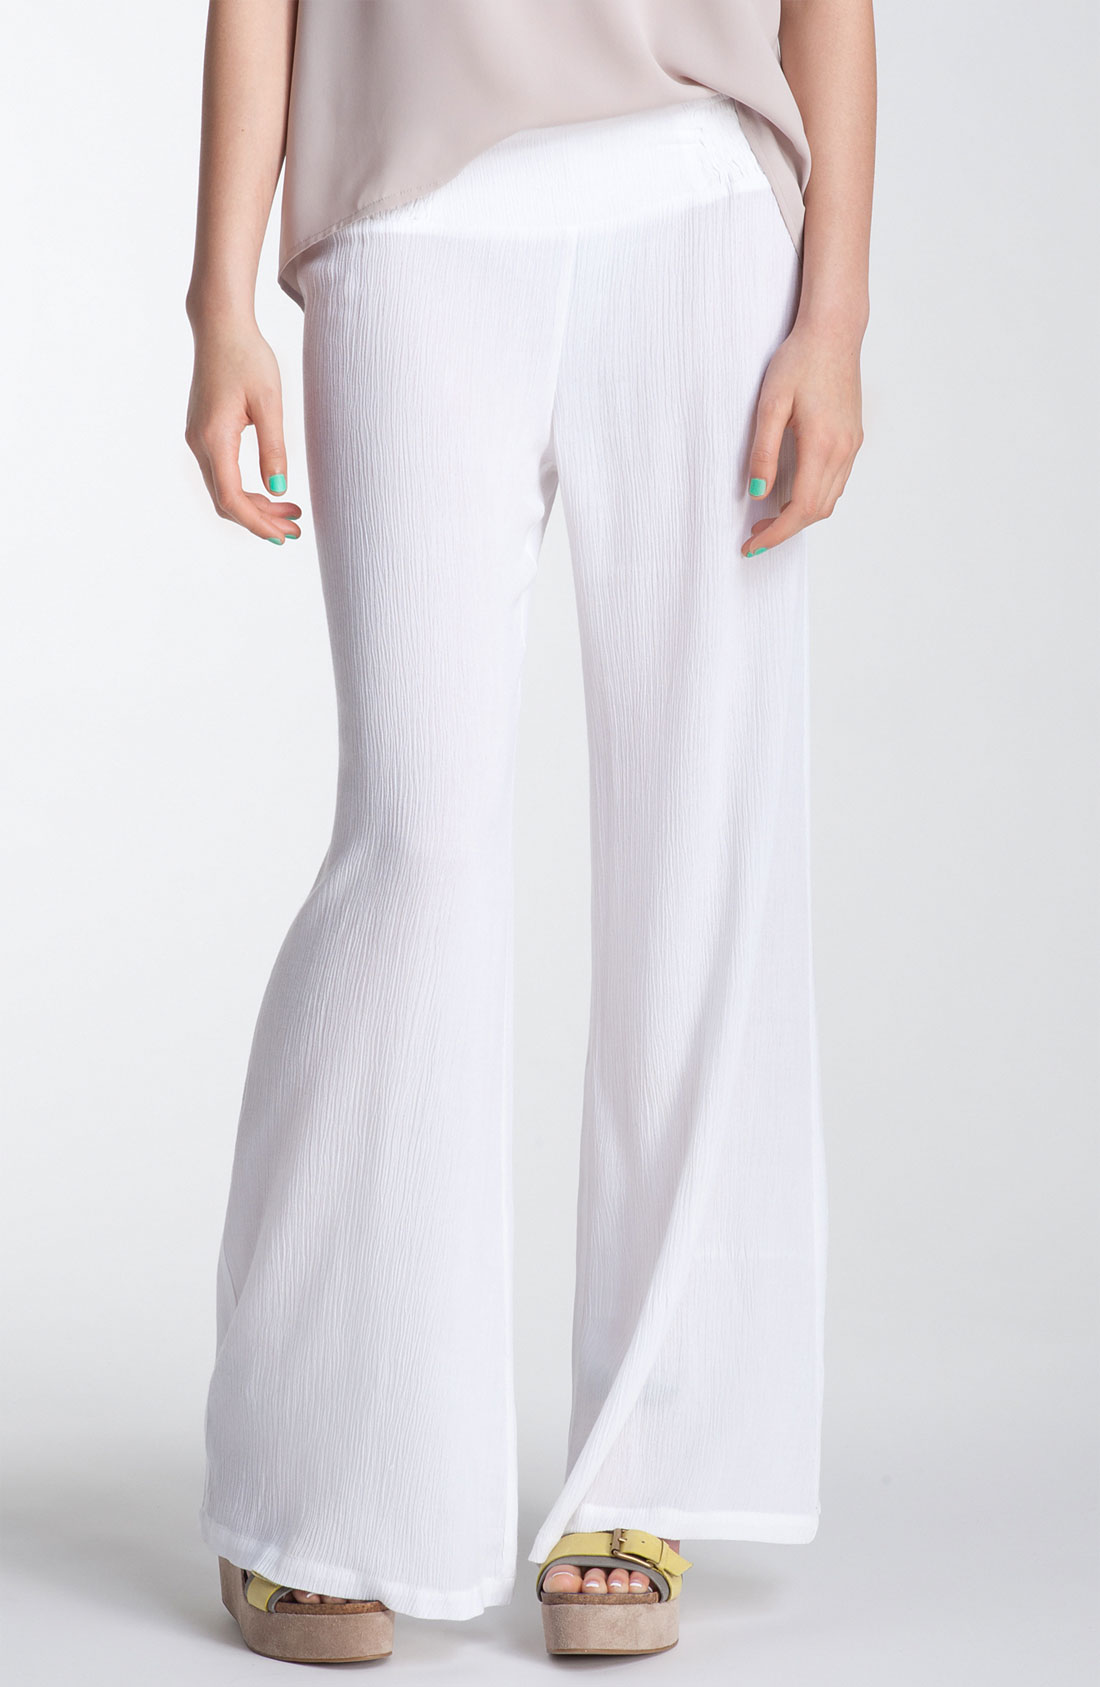 Mimi Chica Crinkled Gauze Wide Leg Pants in White | Lyst